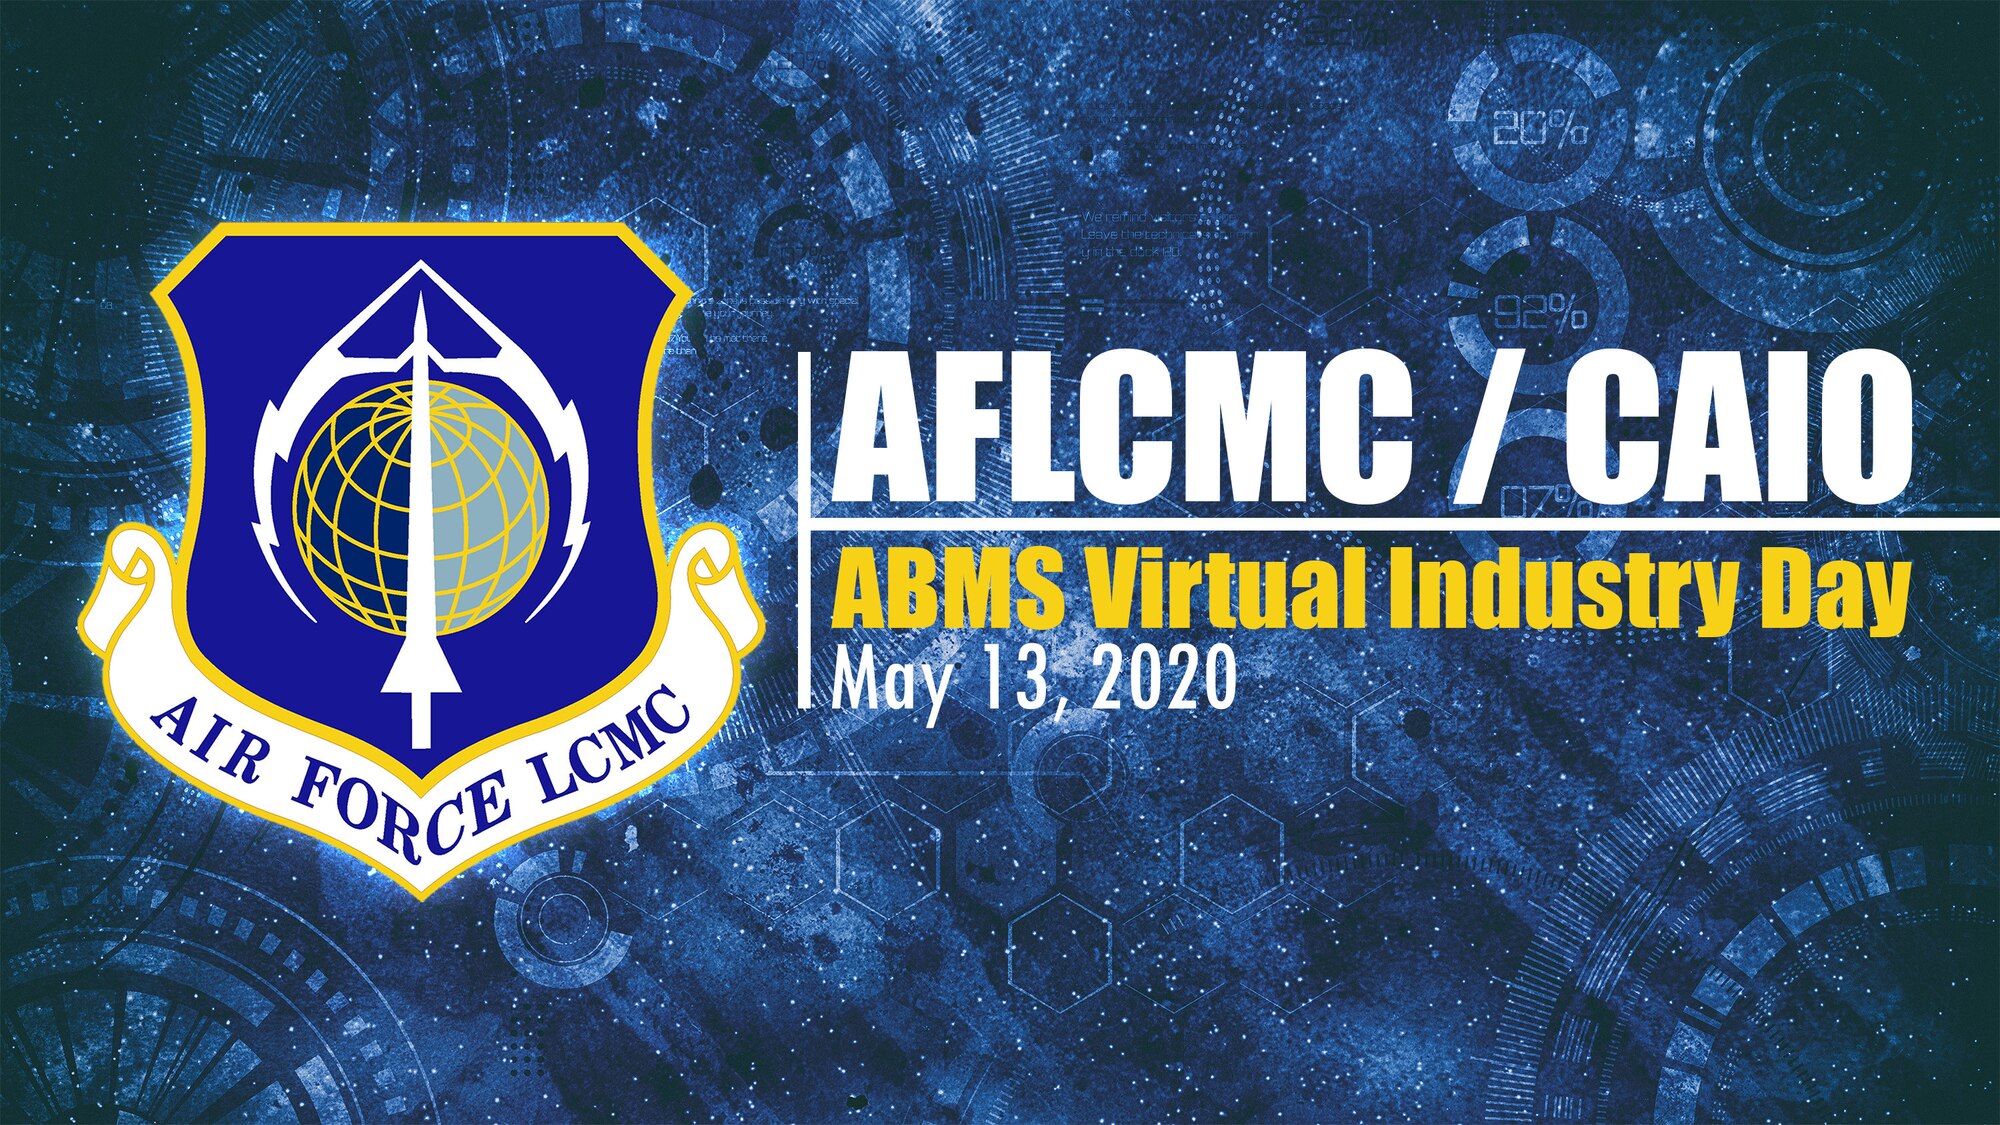 ABMS virtual industry day